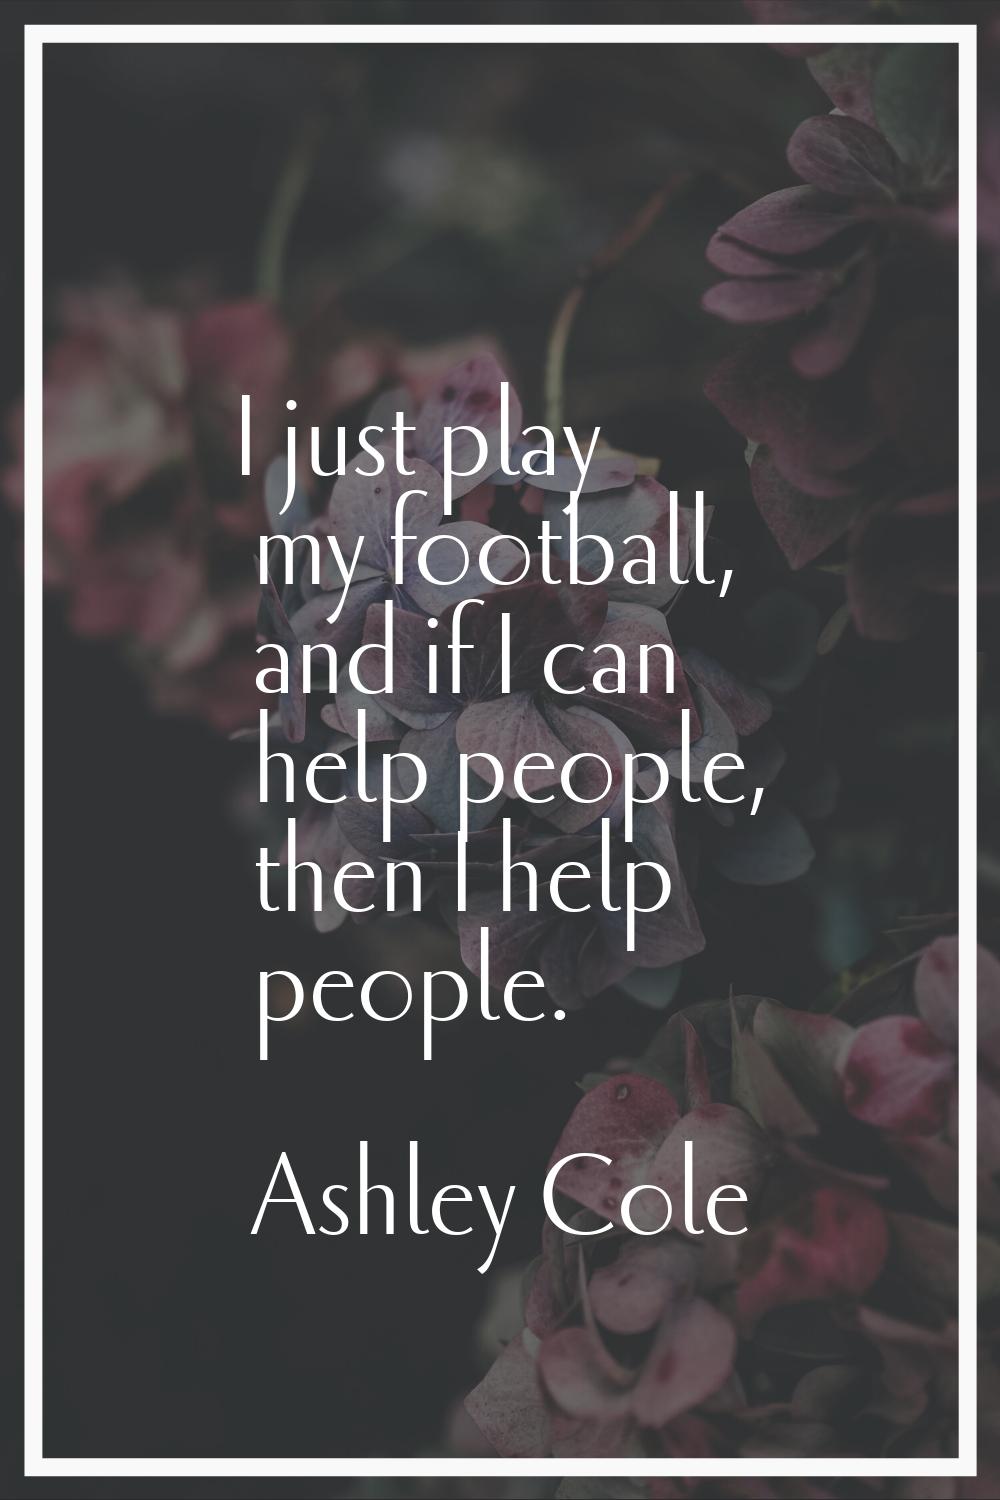 I just play my football, and if I can help people, then I help people.